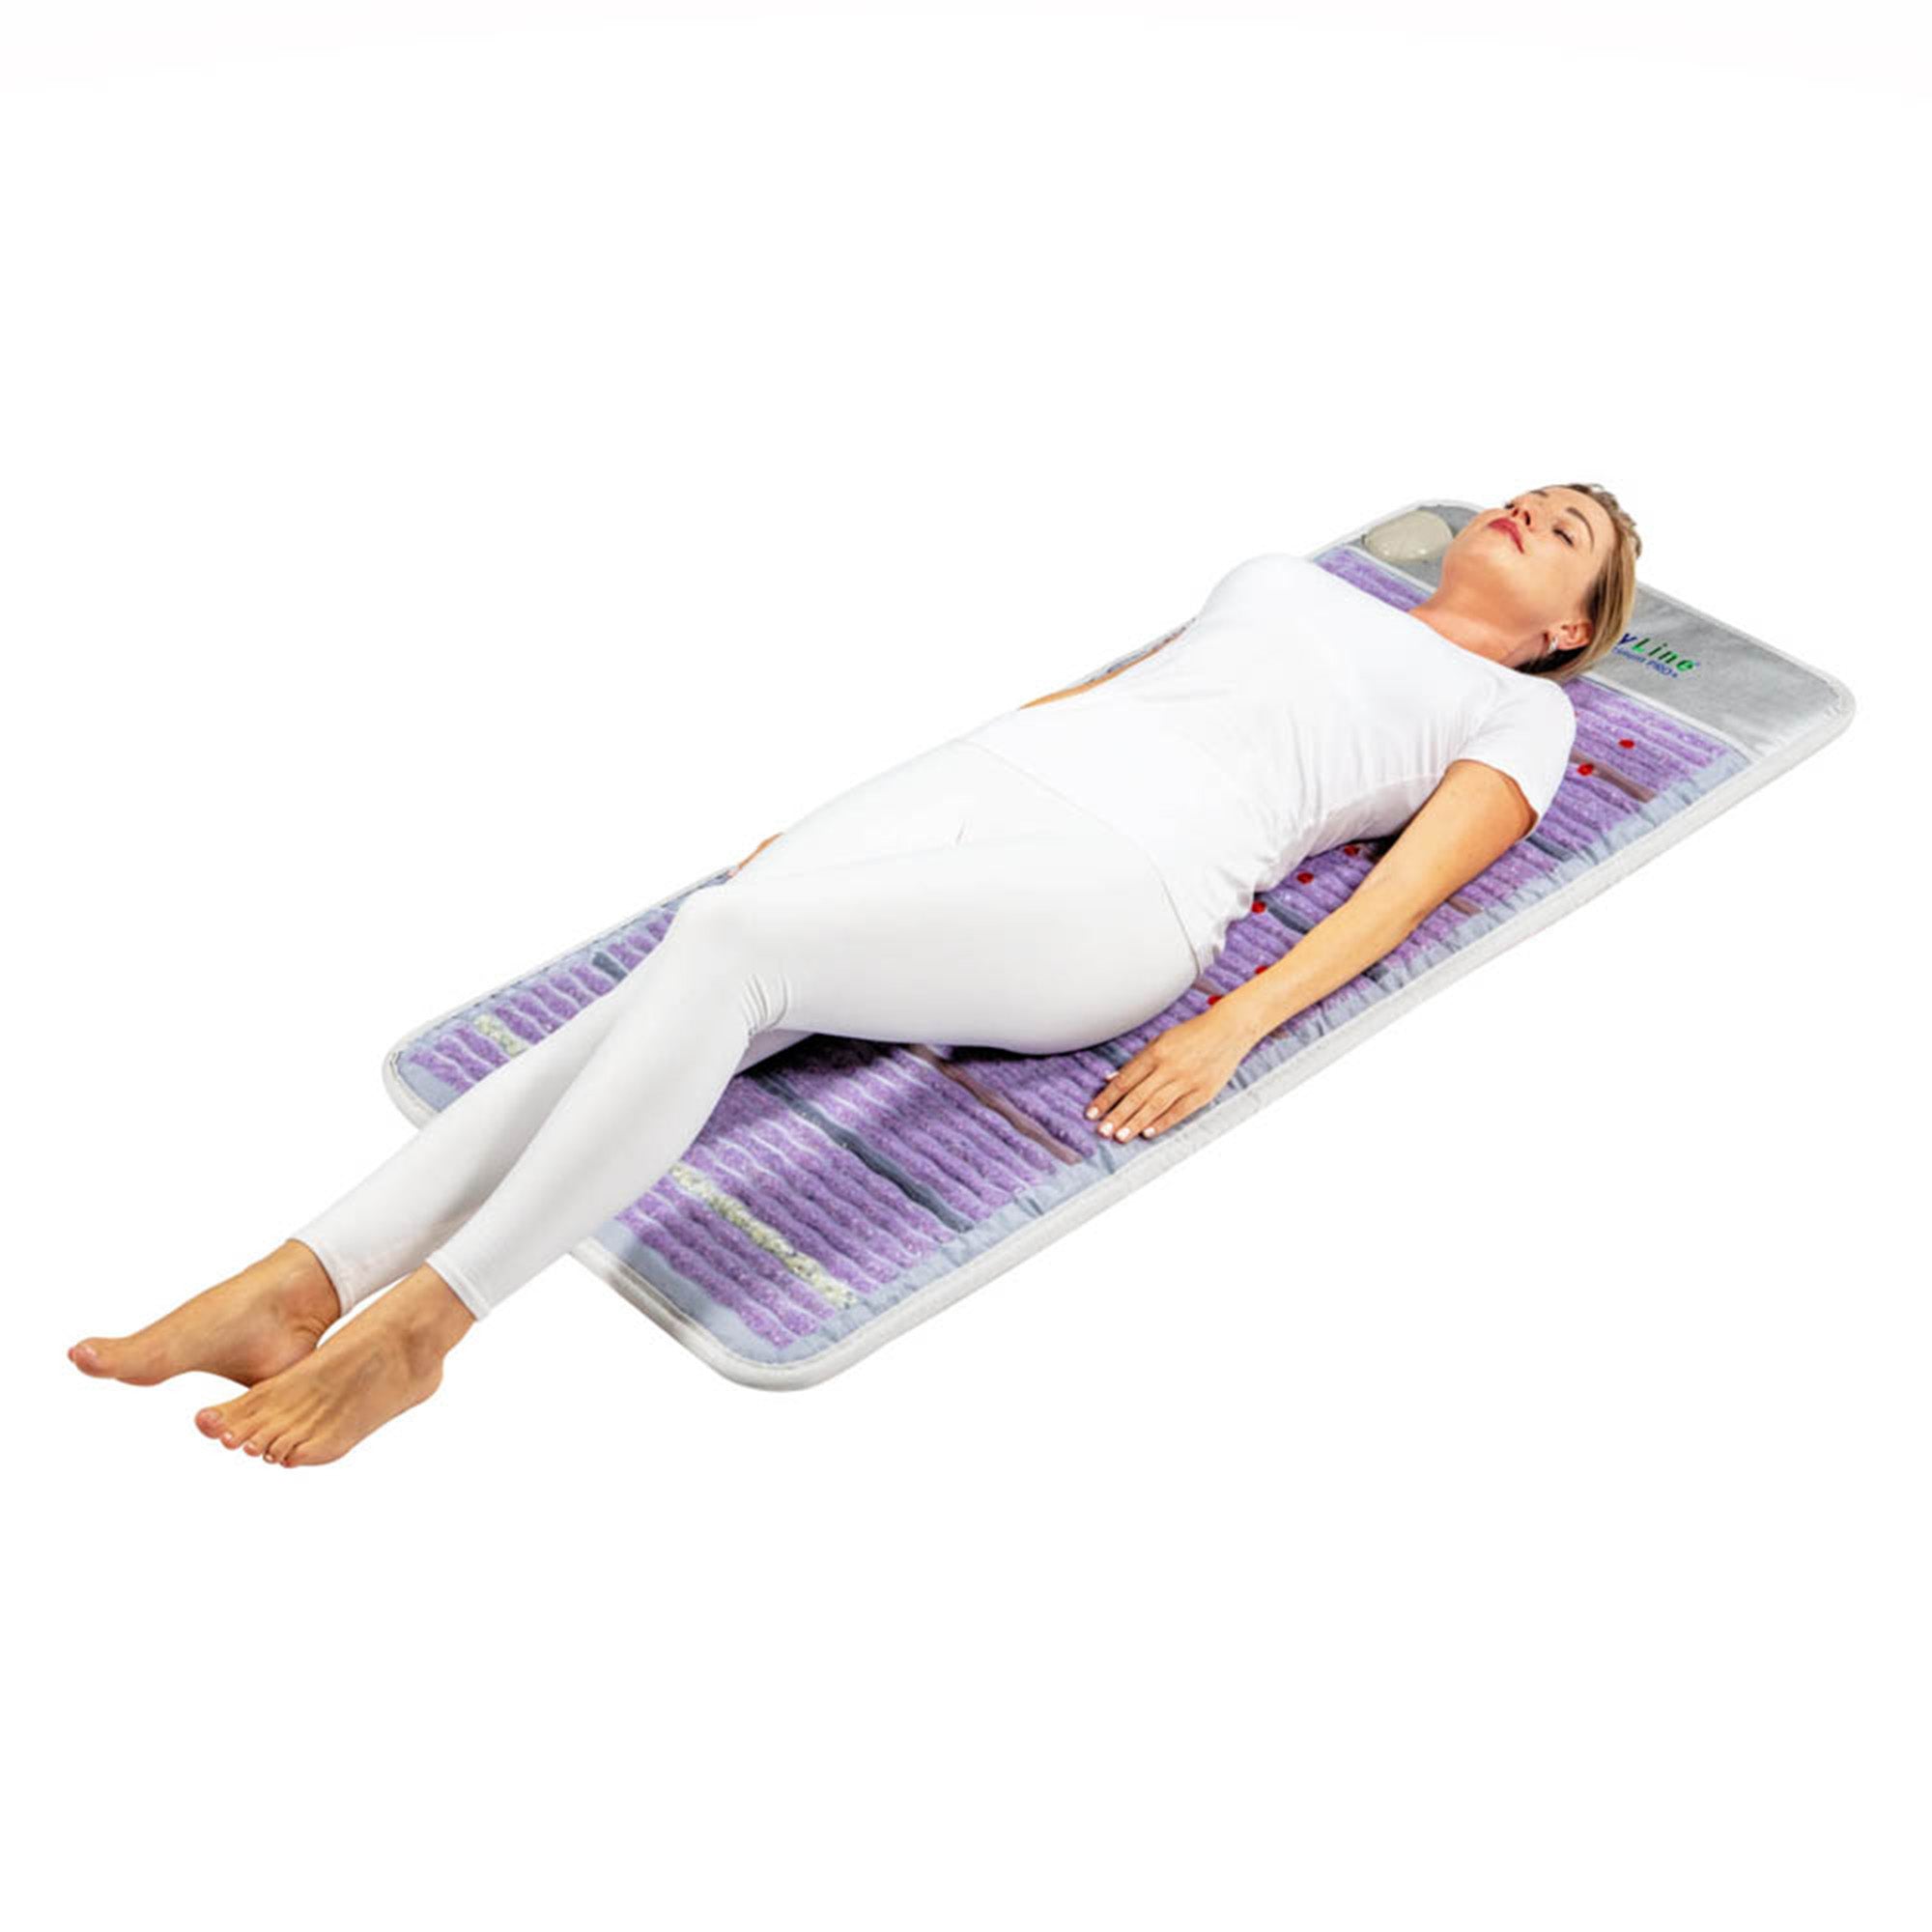 HealthyLine Platinum Mat Full Short 6024 with 30 Photon LED and advanced PEMF / FIRM